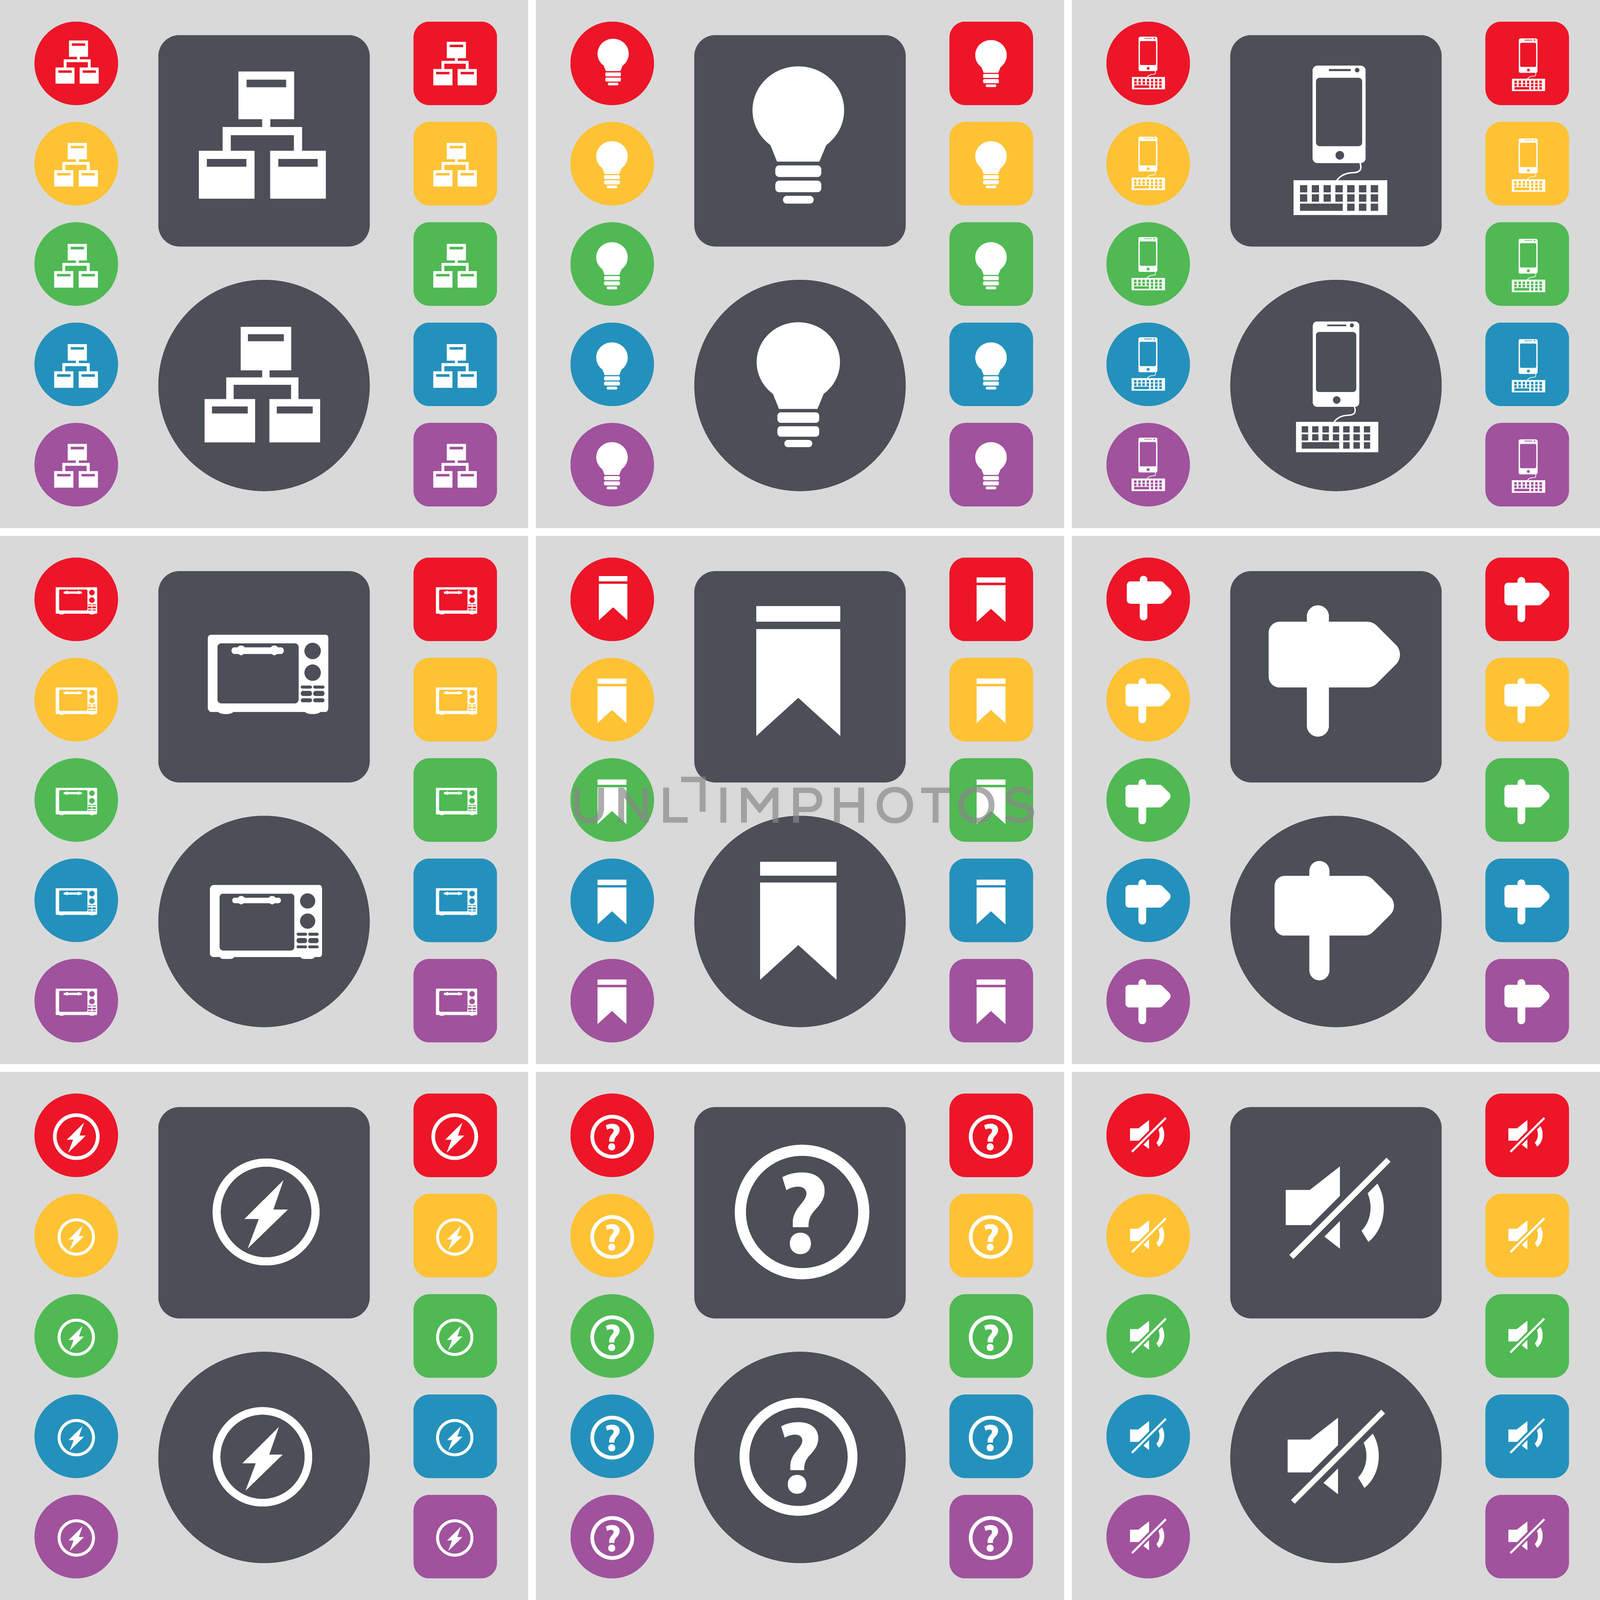 Network, Light bulb, Smartphone, Microwave, Marker, Signpost, Flash, Question mark, Mute icon symbol. A large set of flat, colored buttons for your design. illustration